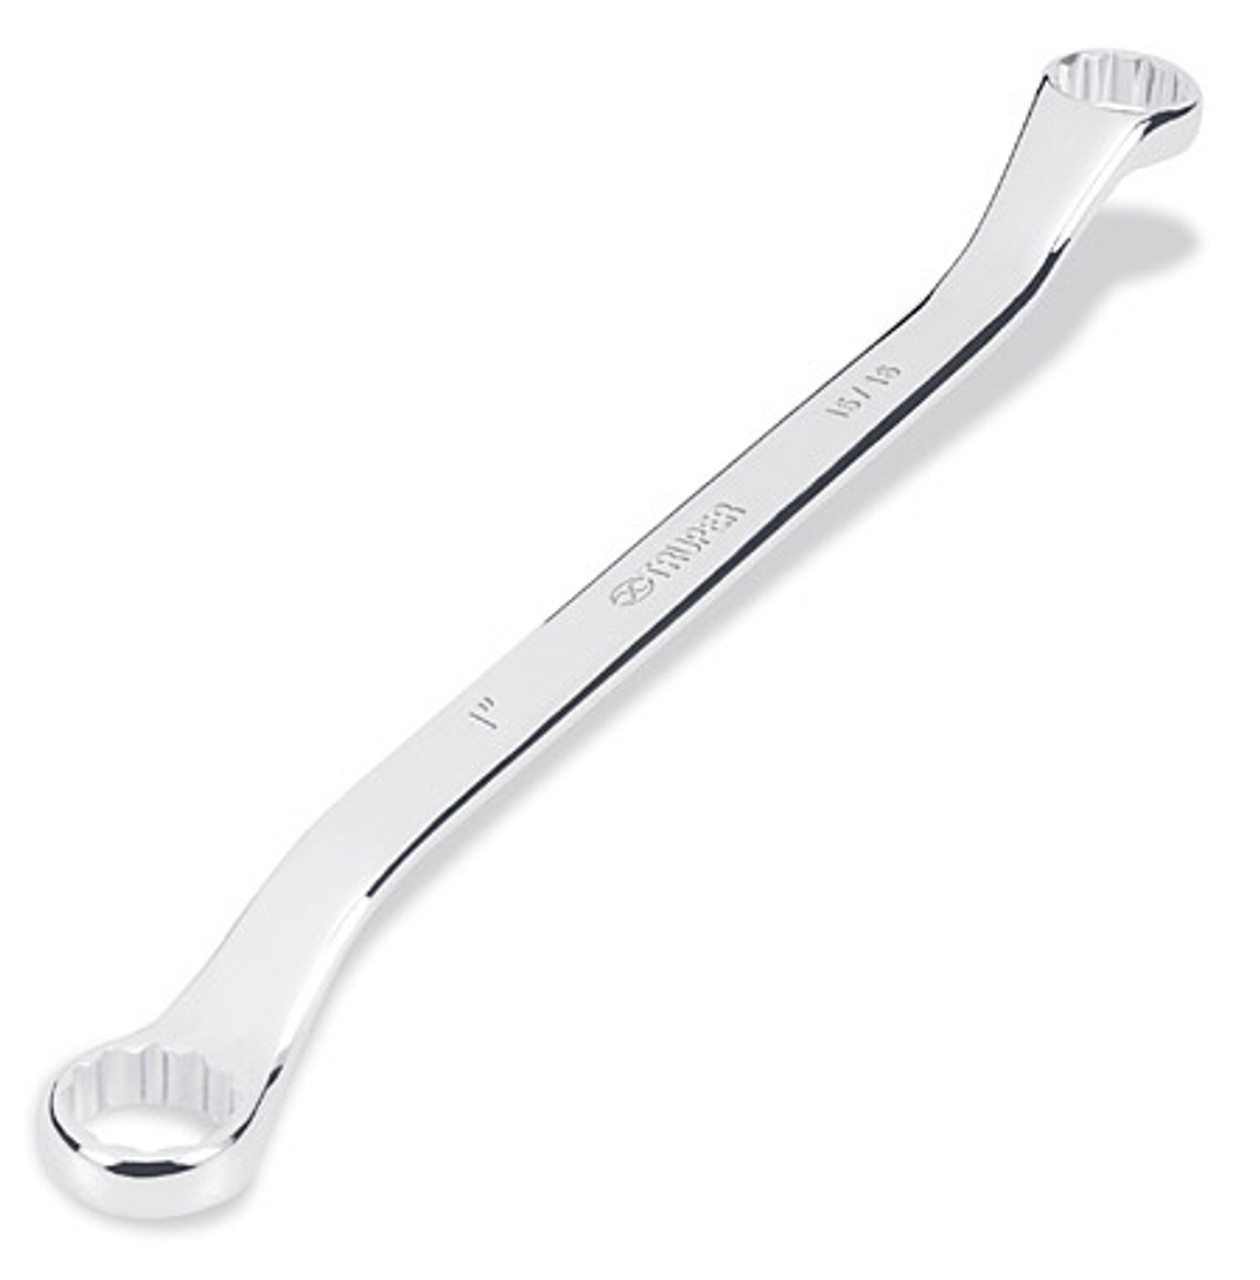 Truper 40ø Offset Box Wrenches Metric, 10 X 11mm X 7" Offset Box Wrench 2 Pack #15761